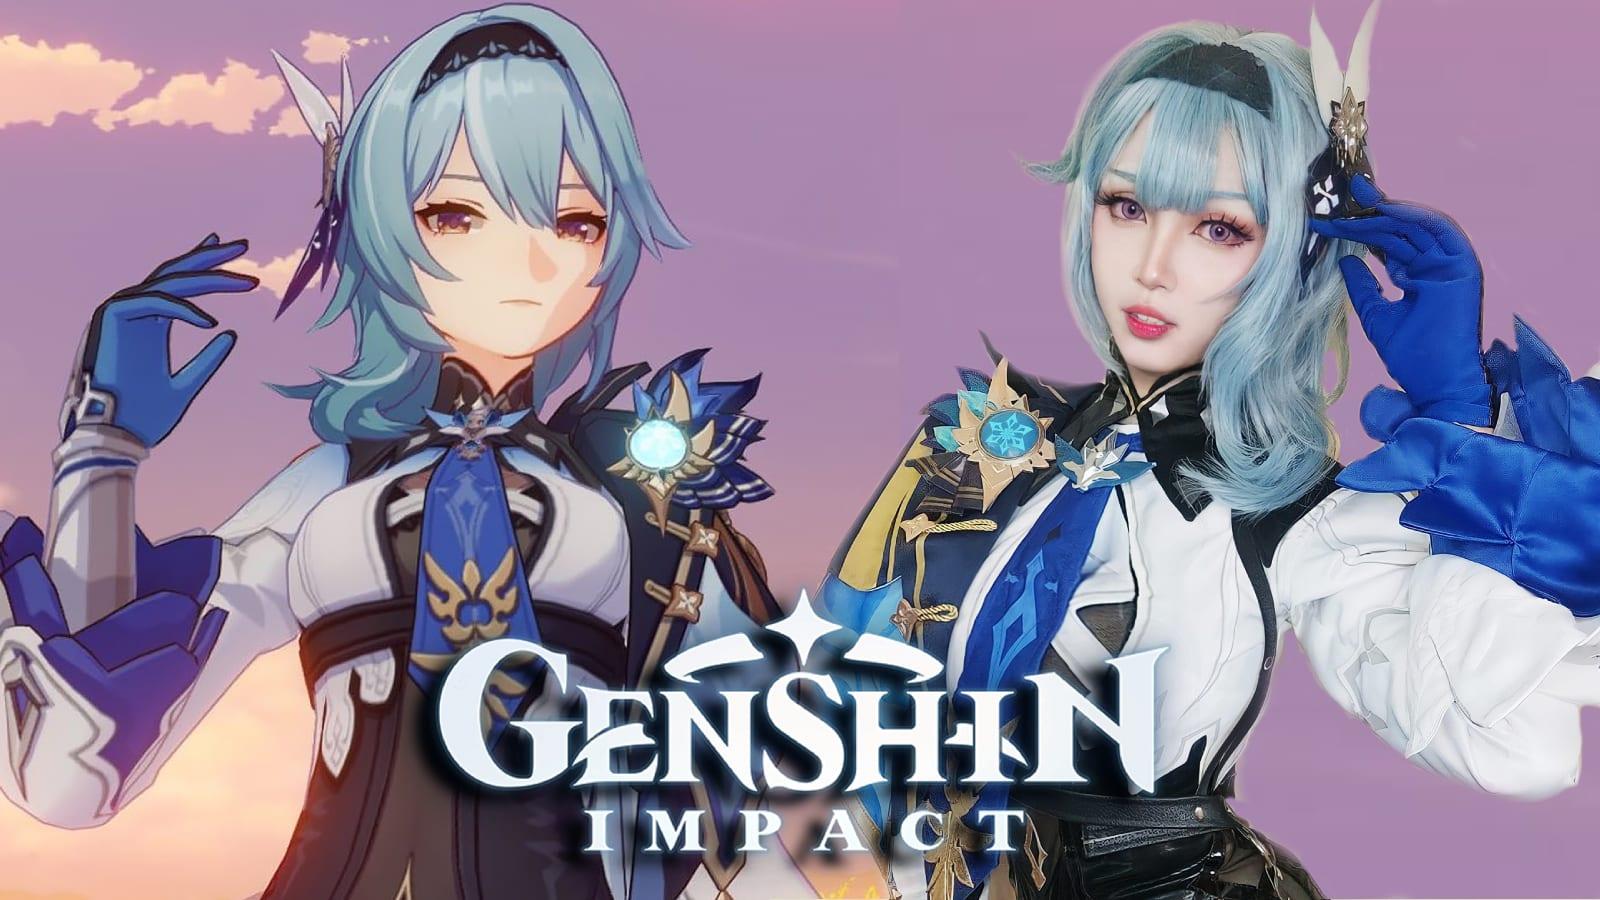 Eula from Genshin Impact next to cosplayer